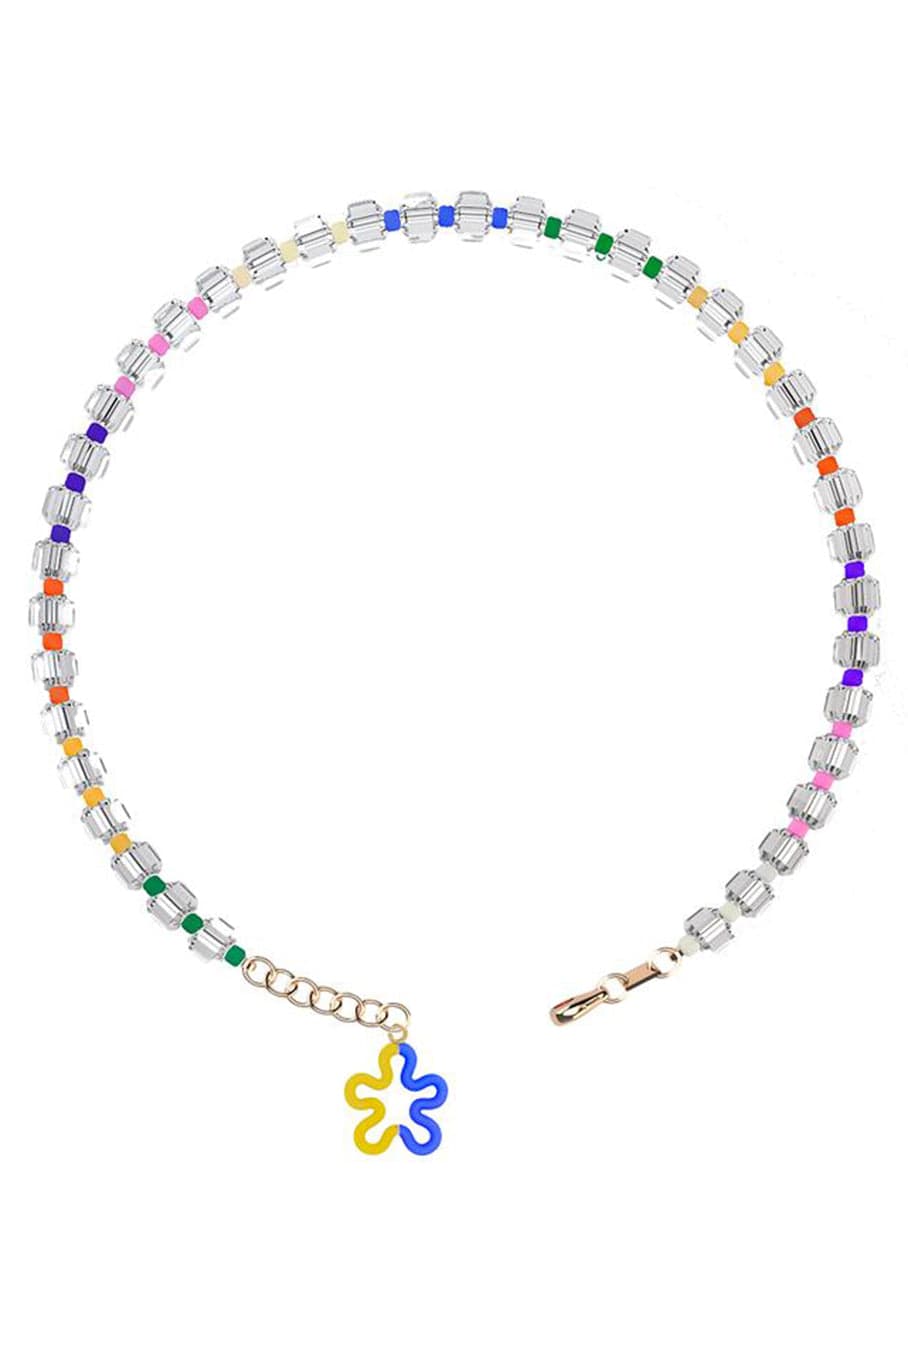 BEA BONGIASCA-Yellow and Blue B Beaded Flower Necklace-YELLOW GOLD